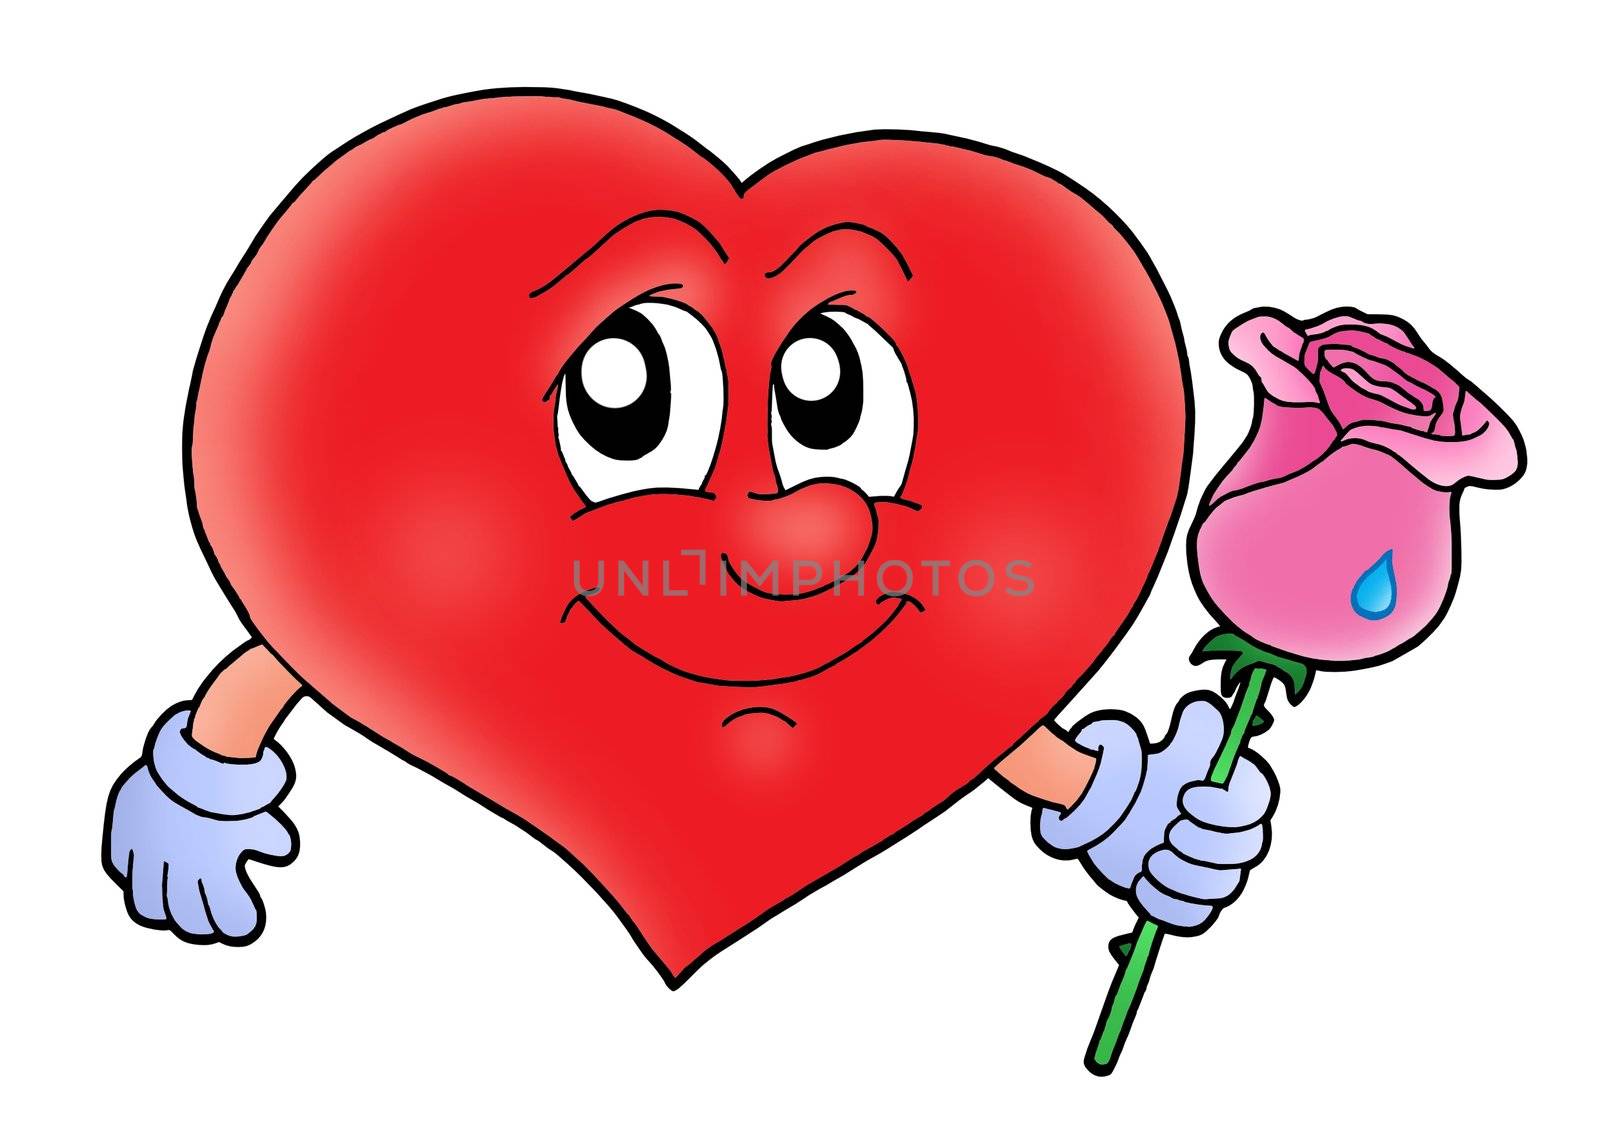 Red heart with rose - color illustration.